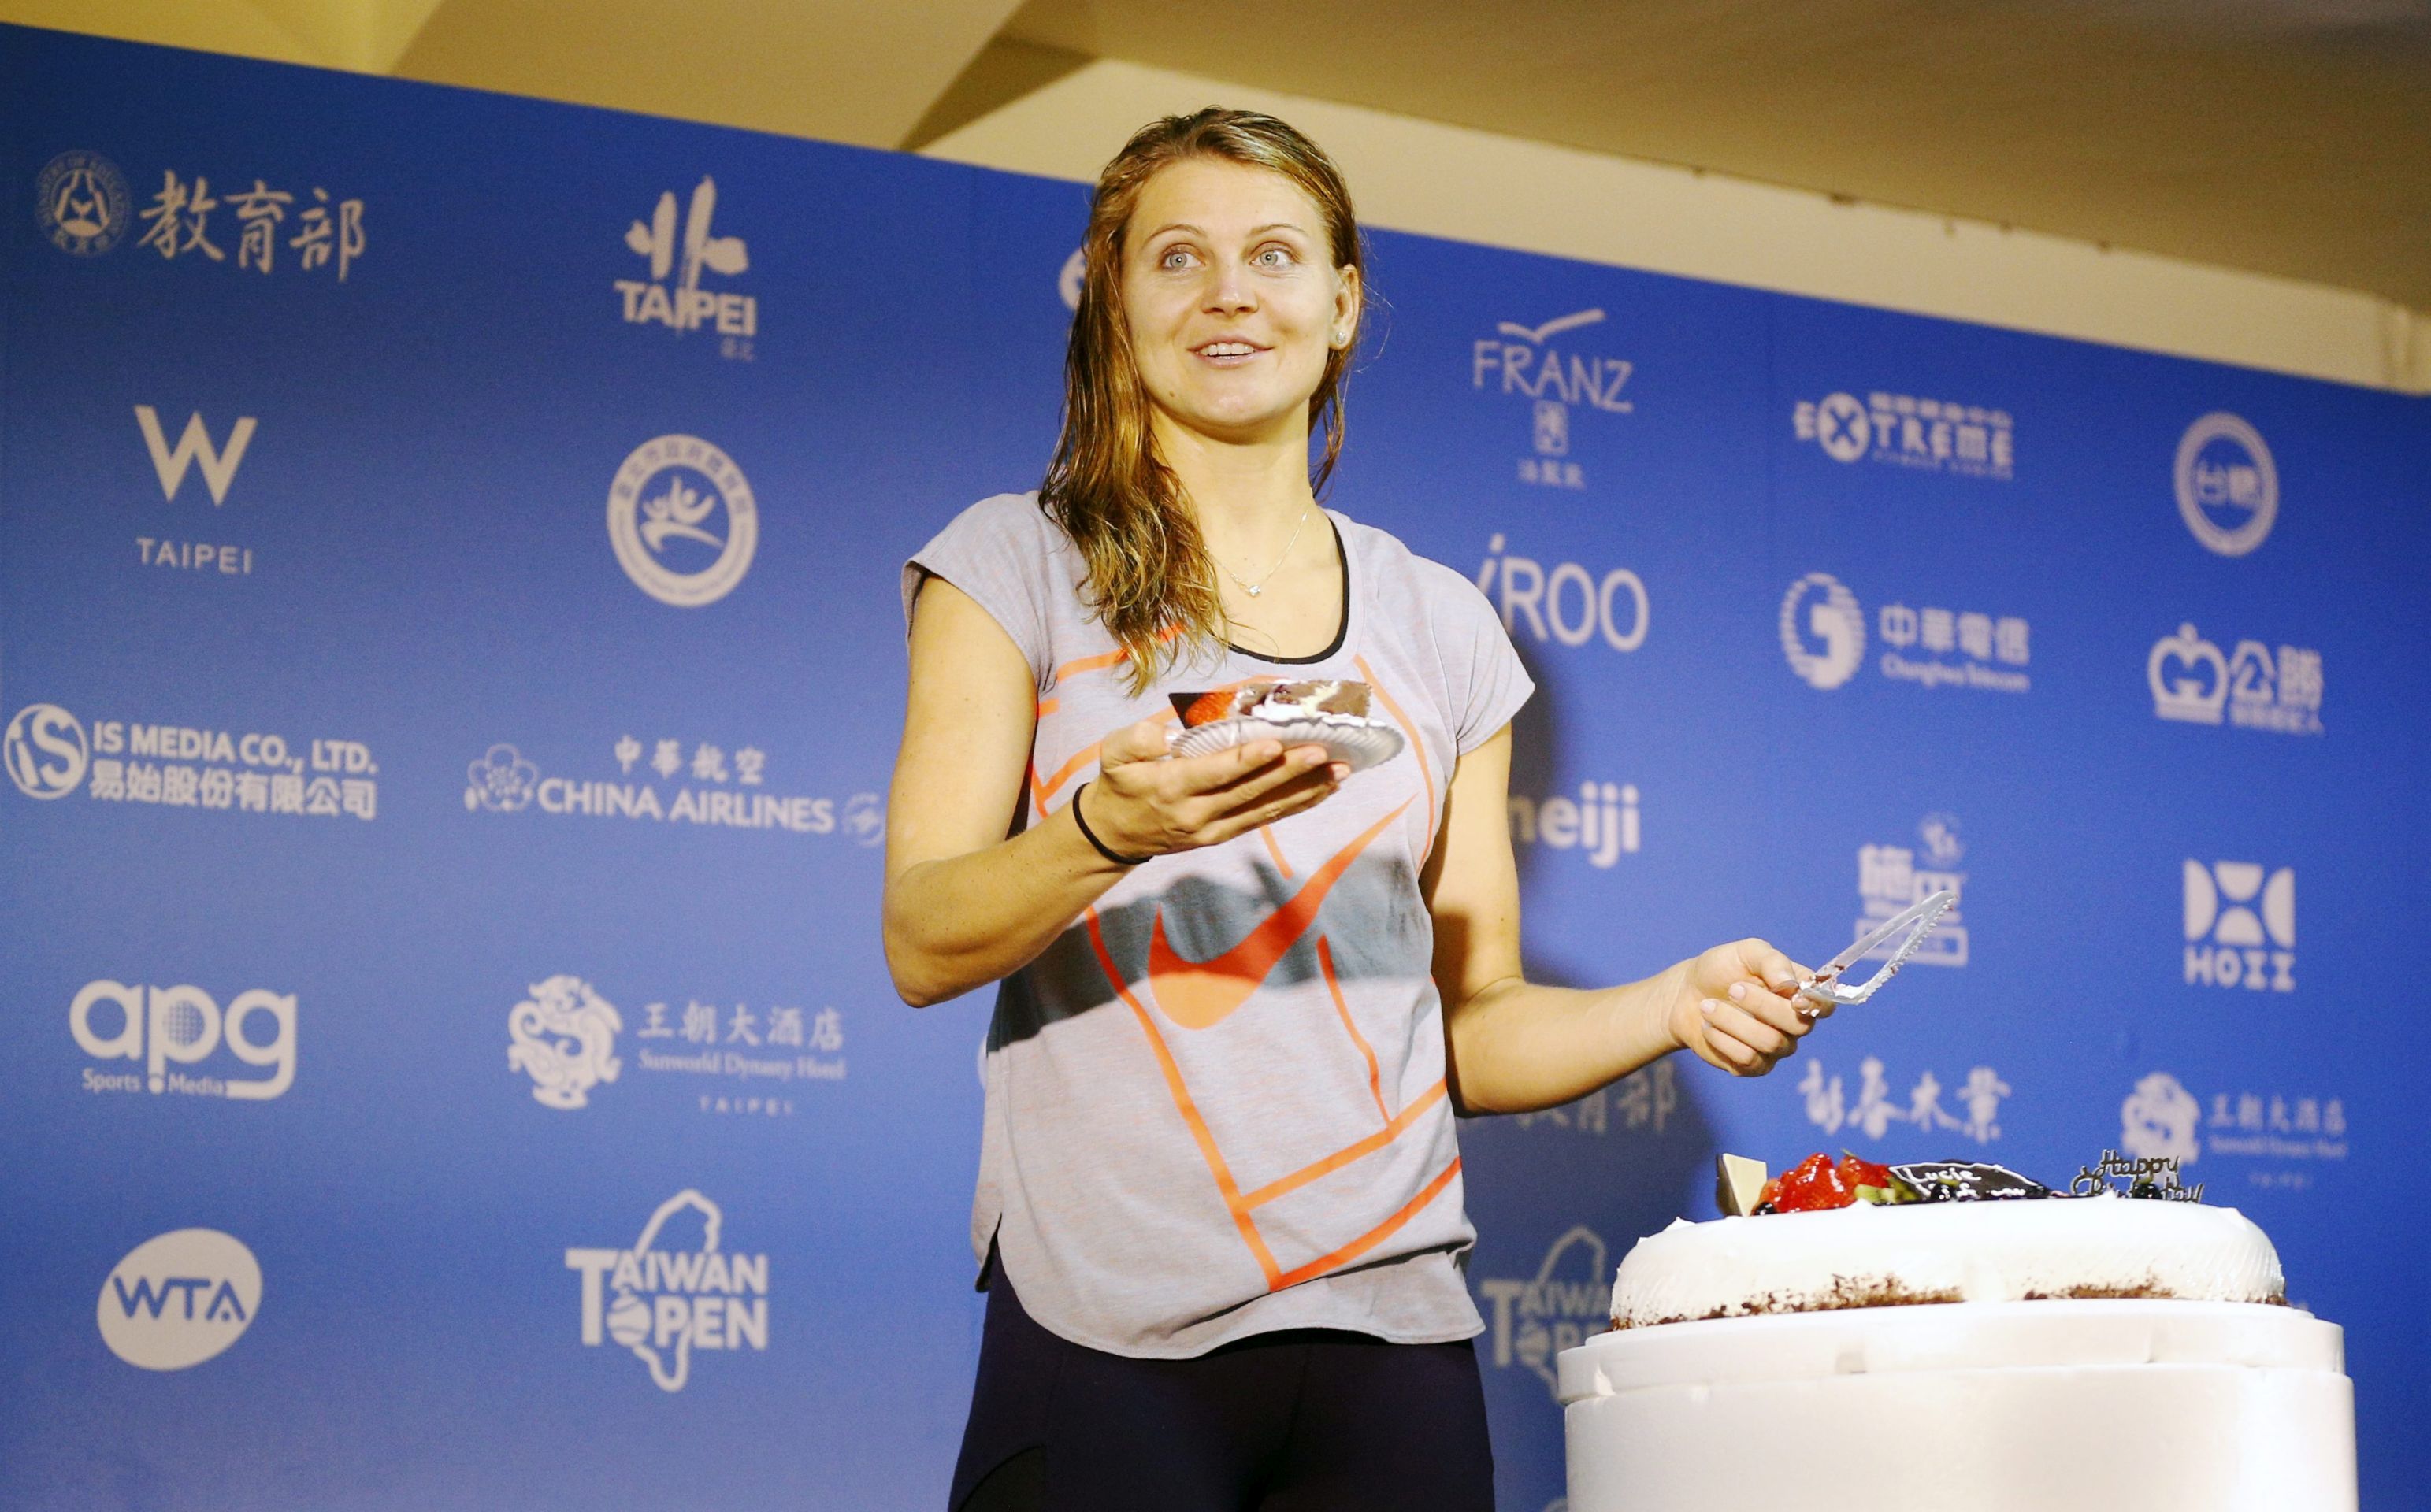 epa05770083 Lucie Safarova of Czech Republic reacts as she celebrates her birthday during a press conference after losing her womens singles semi-final match against Shuai Peng of China at the Taiwan Open tennis tournament in Taipei, Taiwan, 04 February 2017.  EPA/RITCHIE B. TONGO